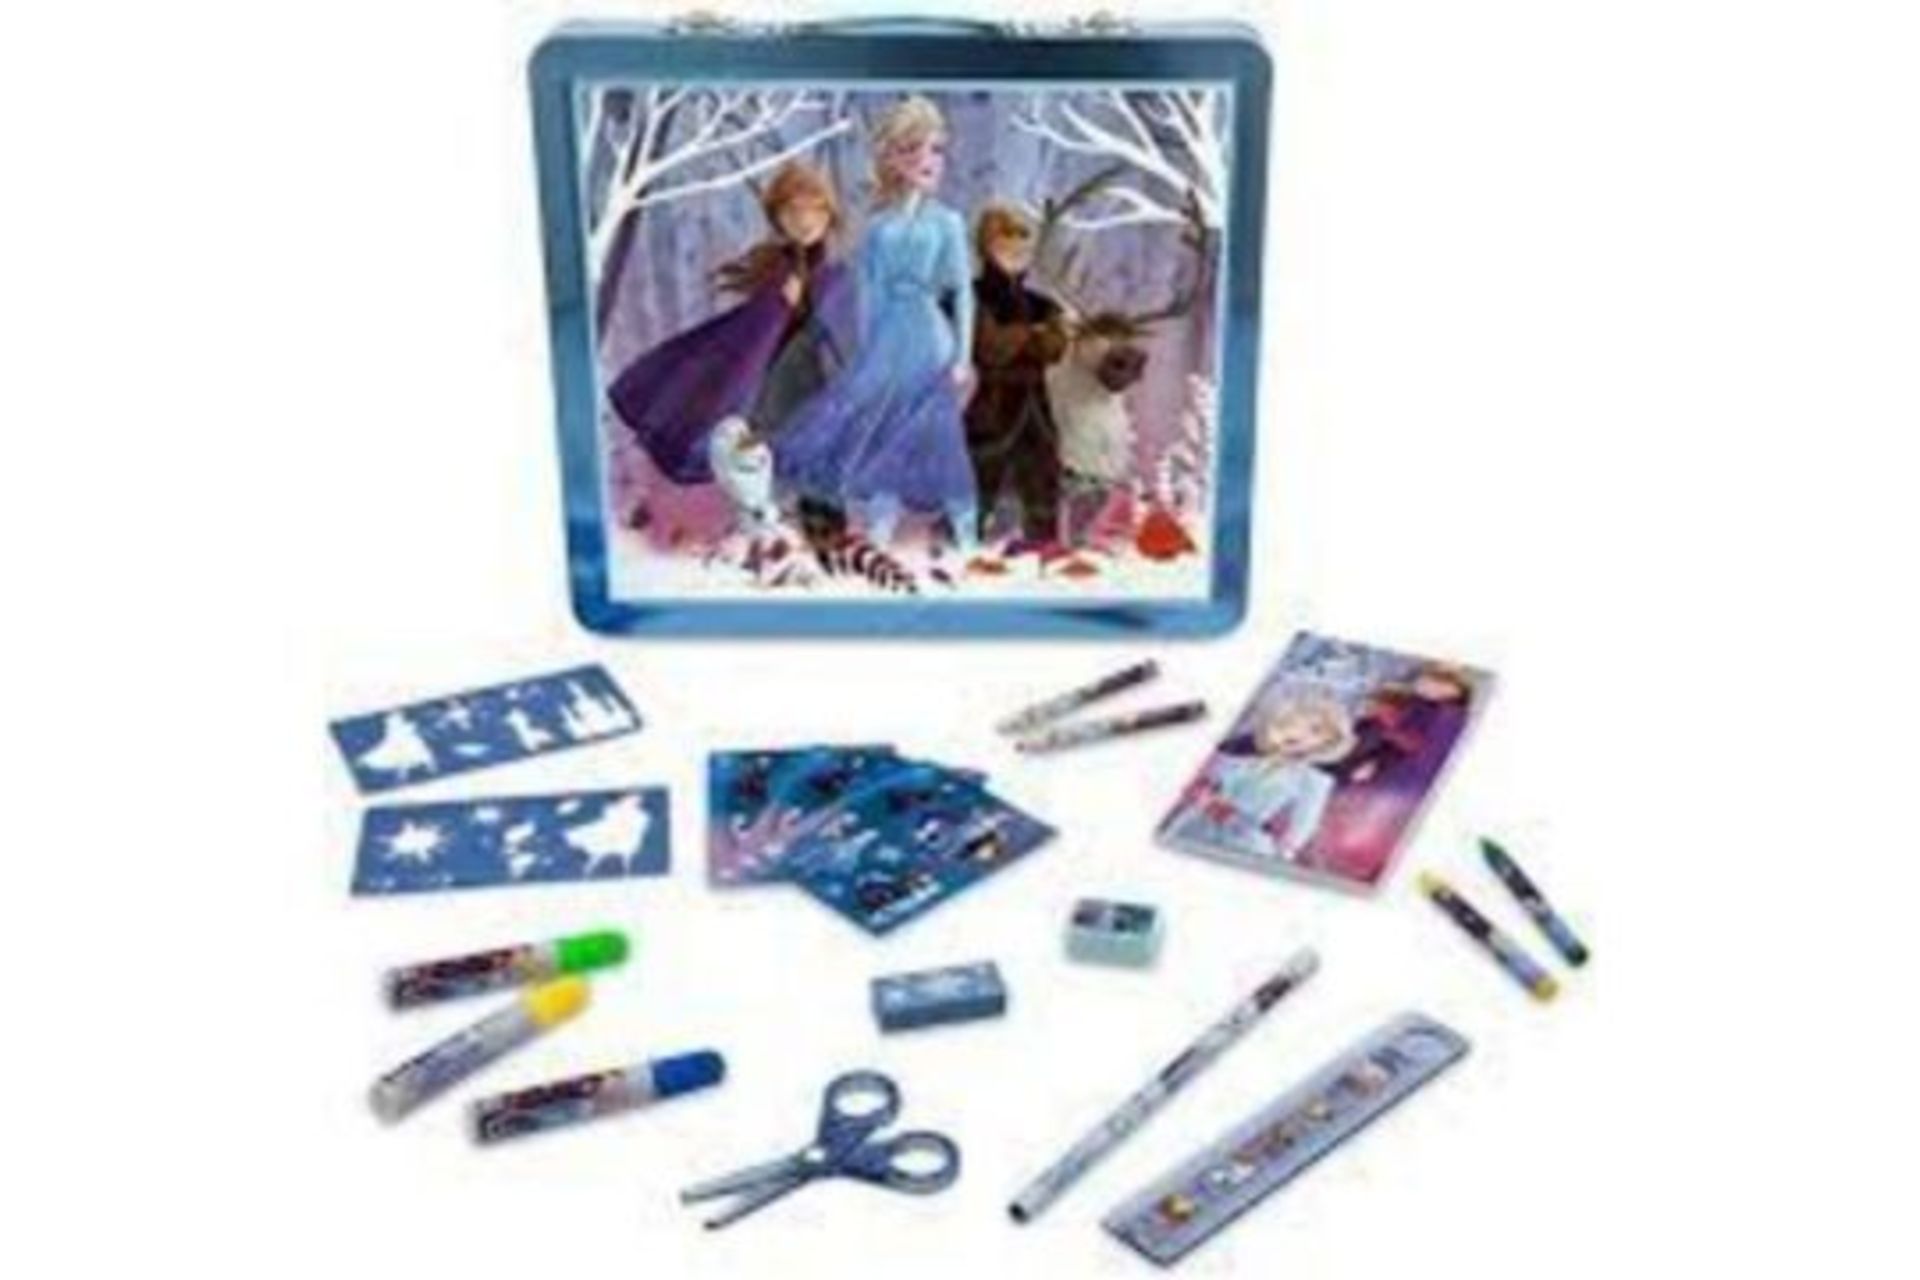 5 X Disney Frozen Tin Art Case. (PICK FROM P/W) Excellent for budding artists, this portable